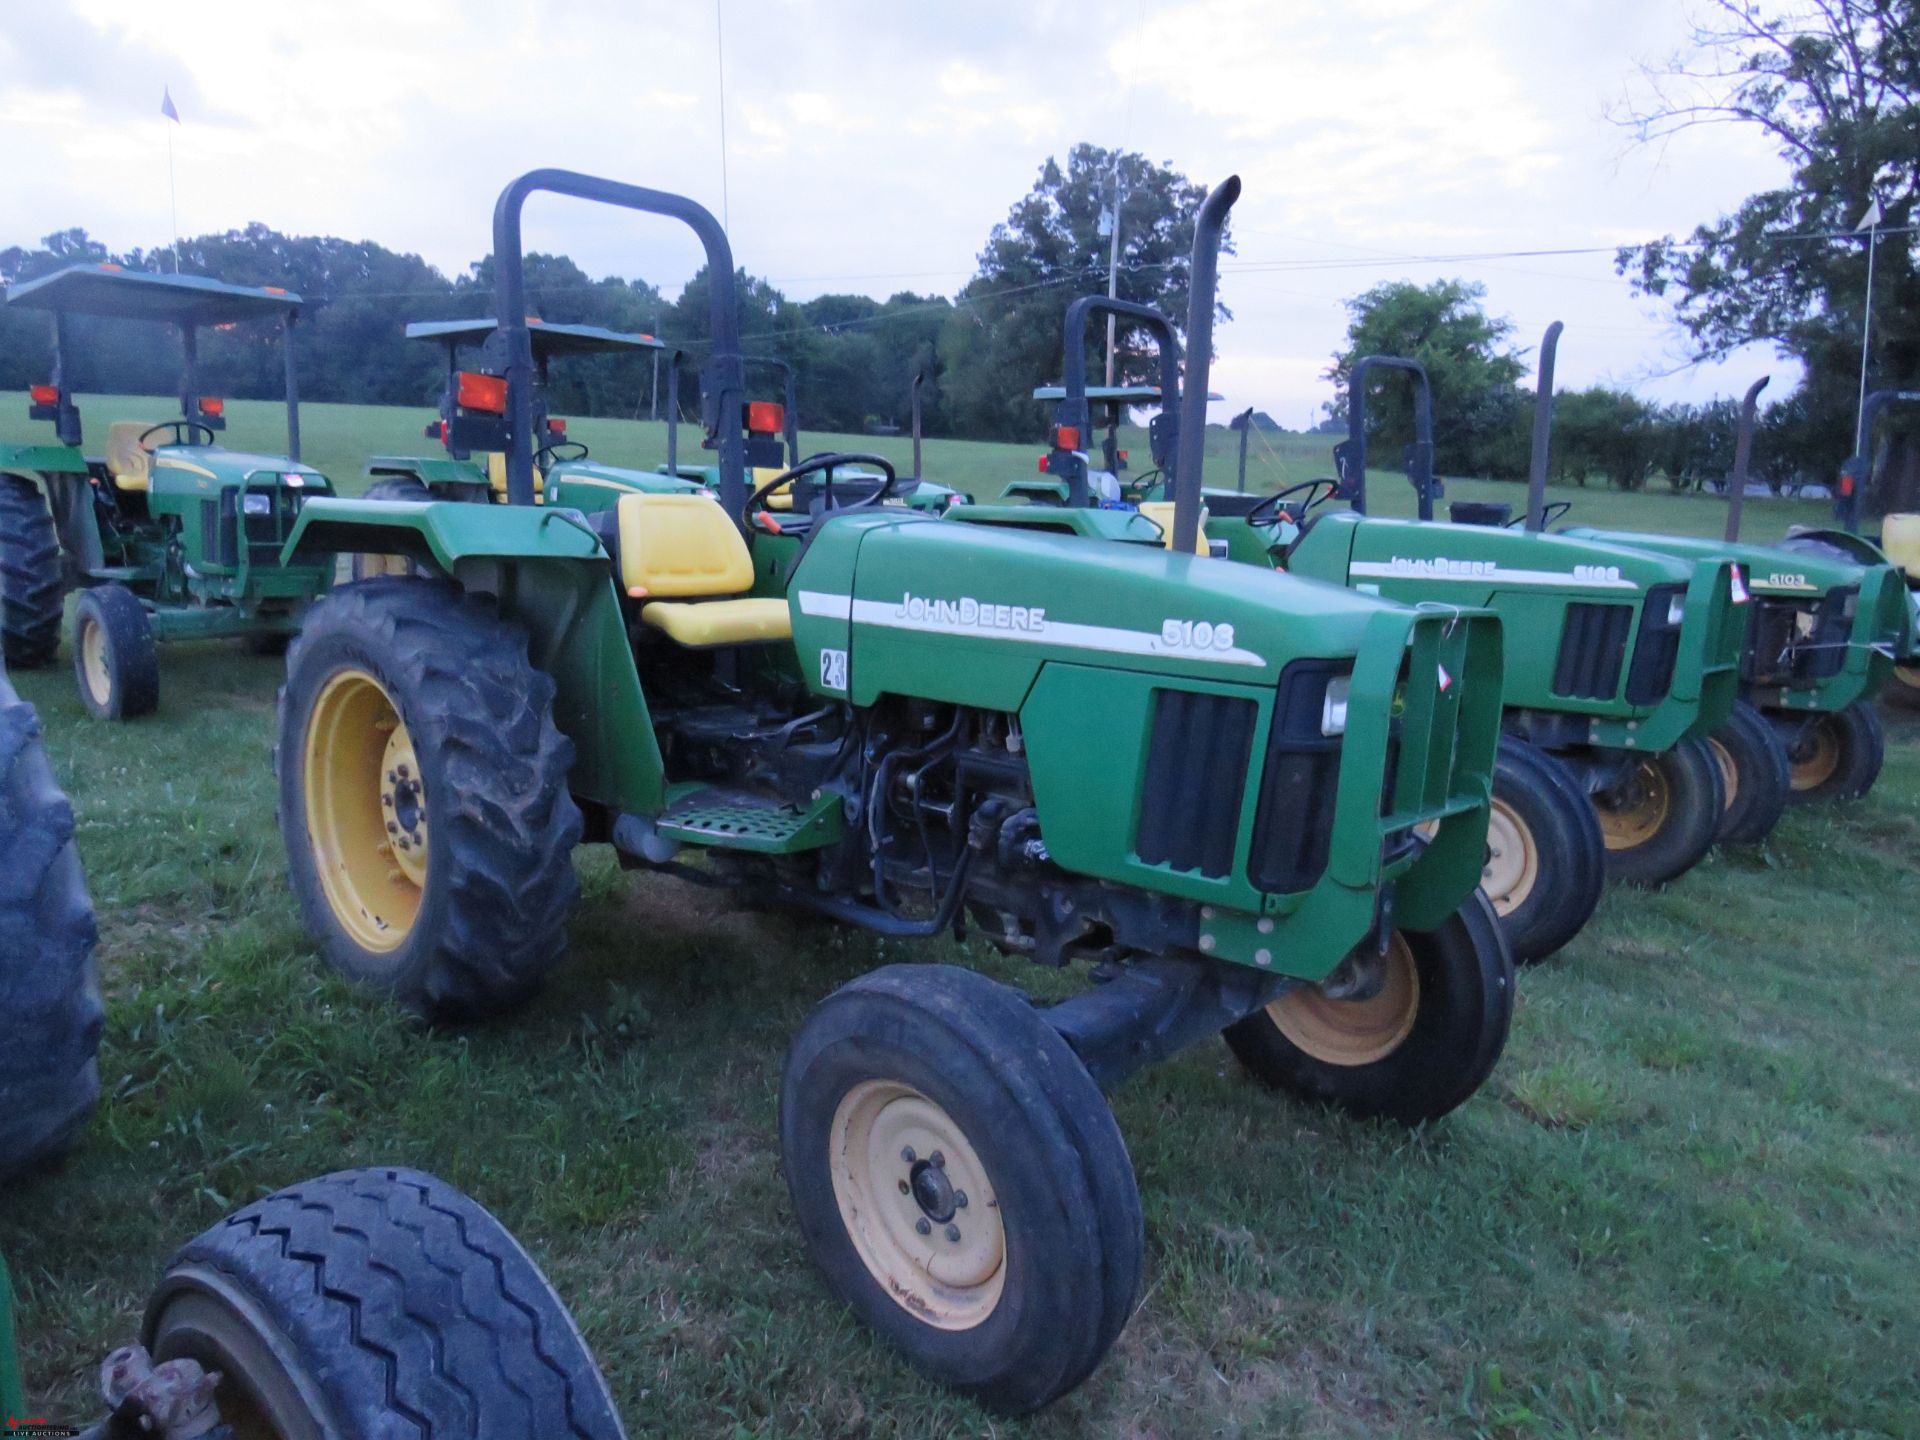 2007 JOHN DEERE 5103 TRACTOR, 3PT, NO TOP LINK, HAS PTO, 13.6-28 REAR TIRES, HOURS NOT AVAILABLE - Image 2 of 8